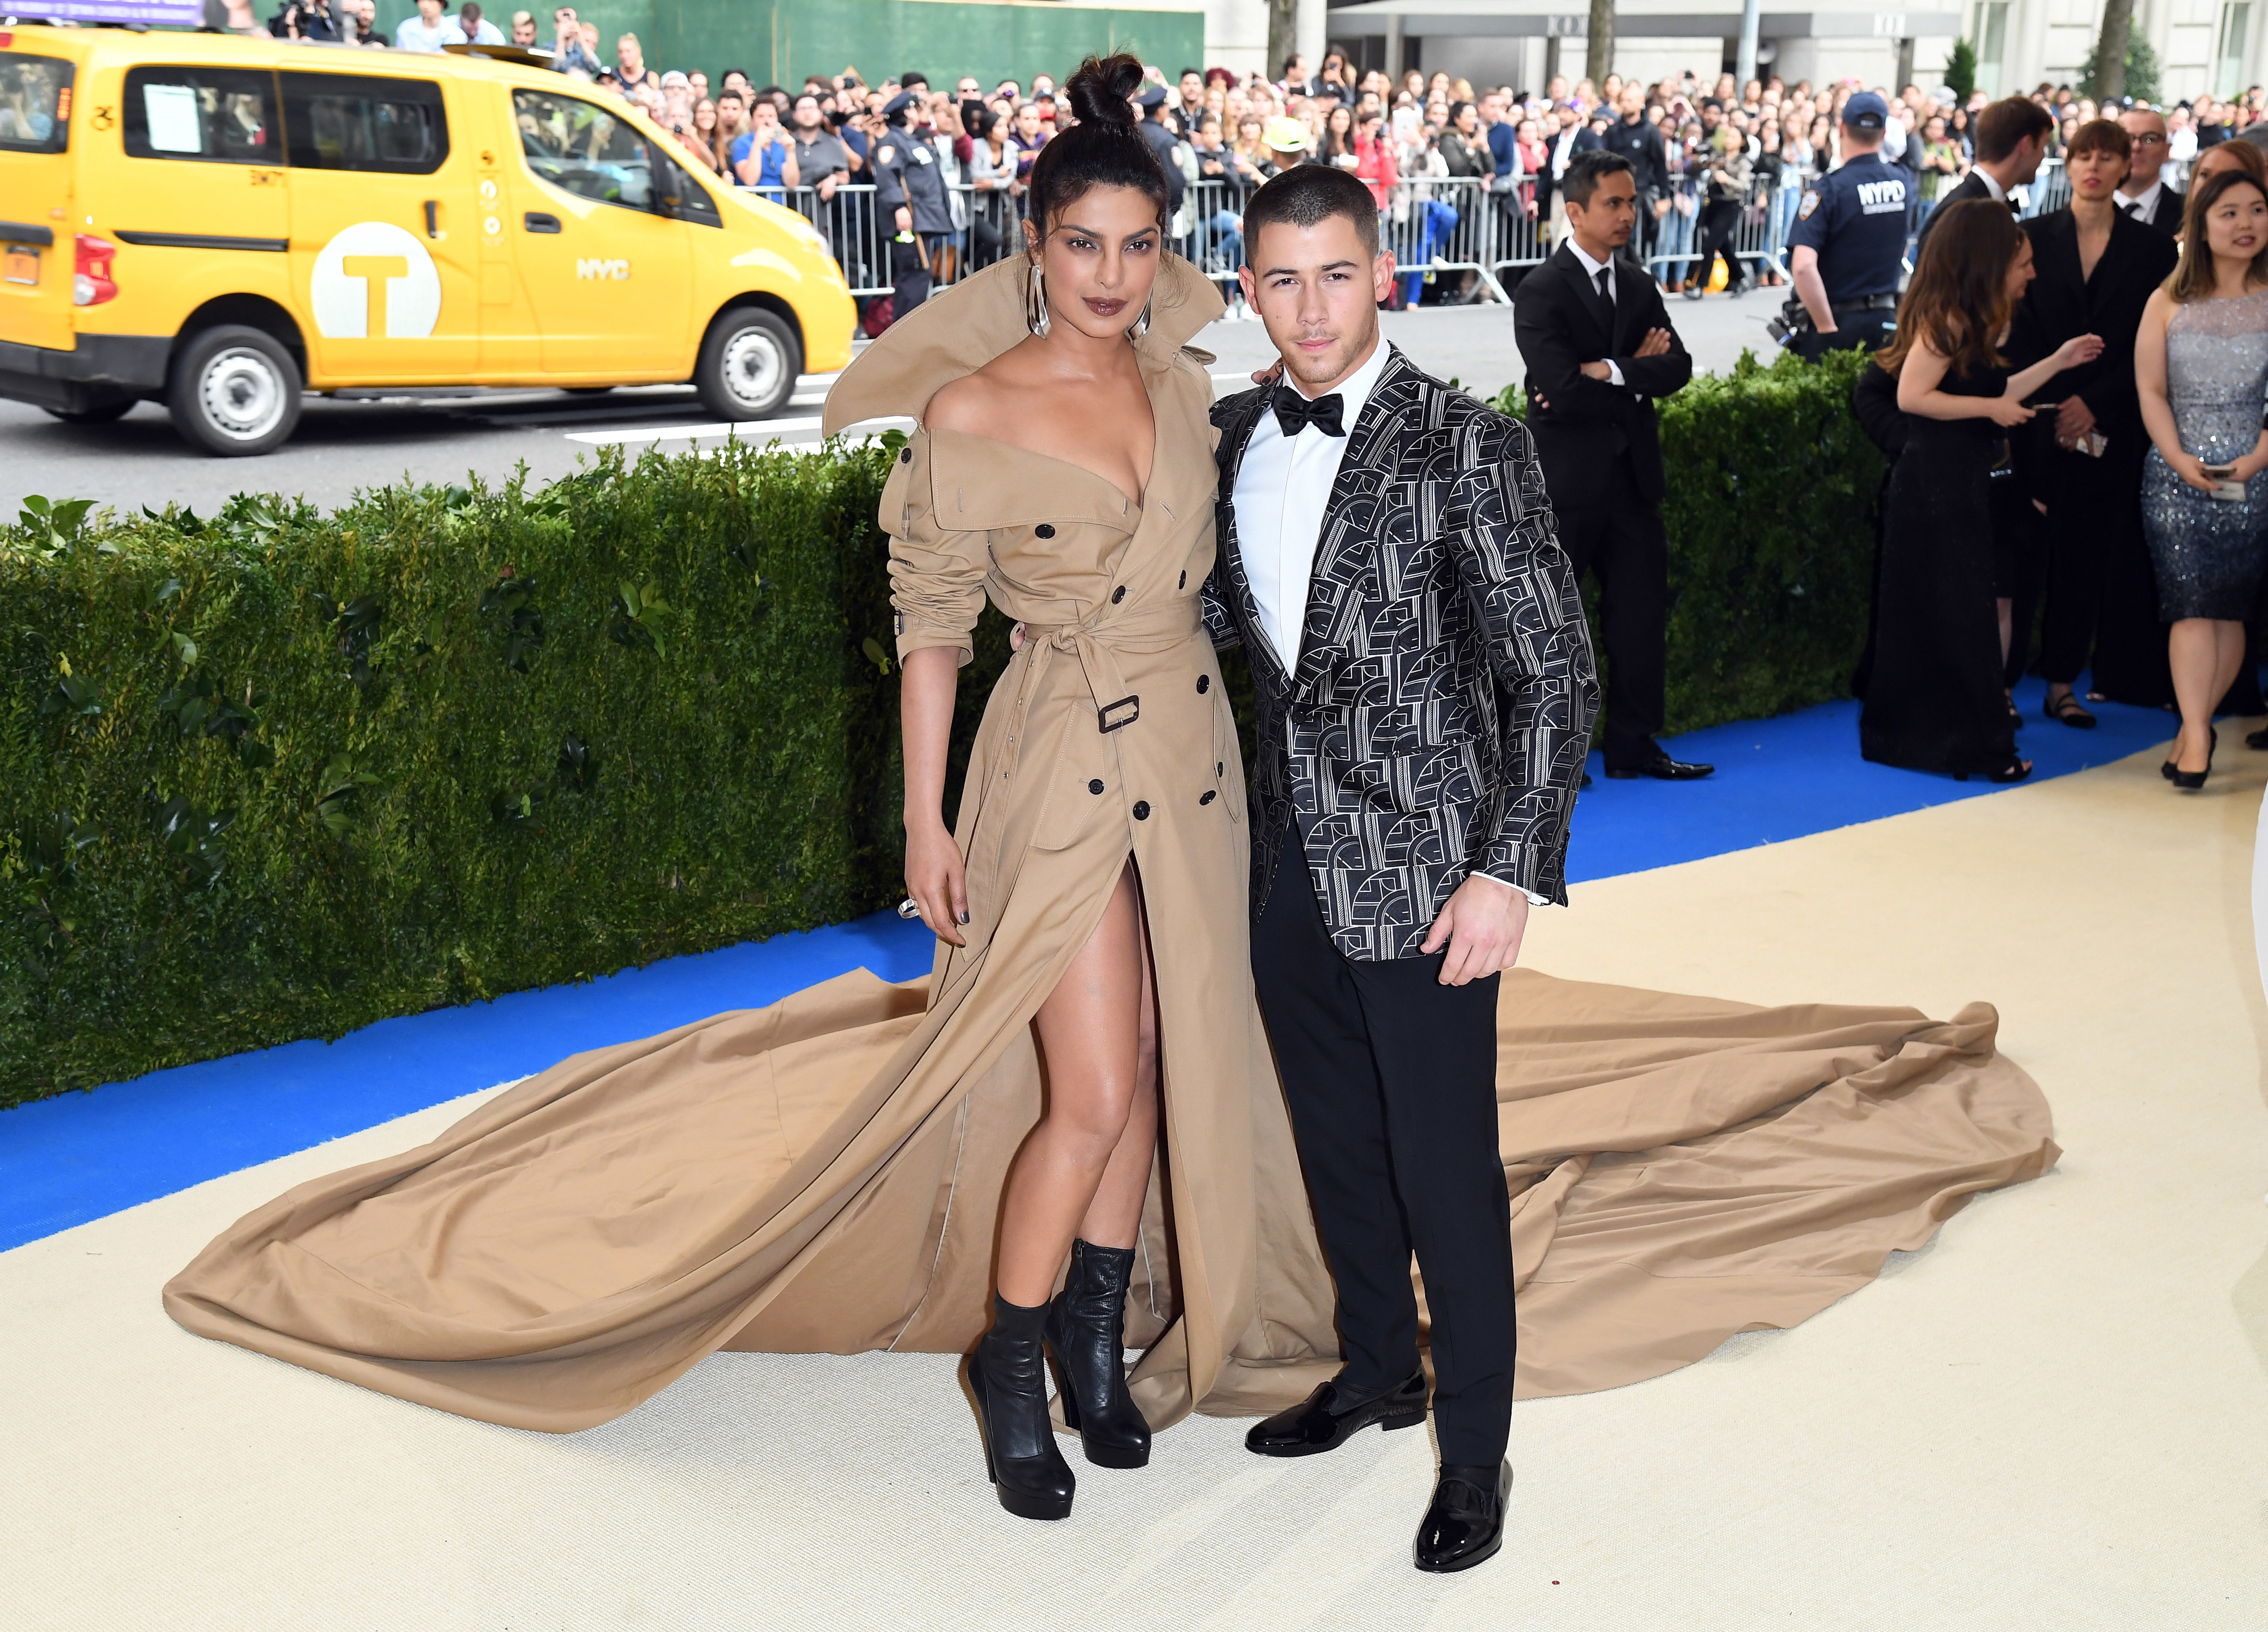 Priyanka Chopra in a trench coat-inspired dress with a long train and Nick Jonas in a patterned tuxedo on the red carpet